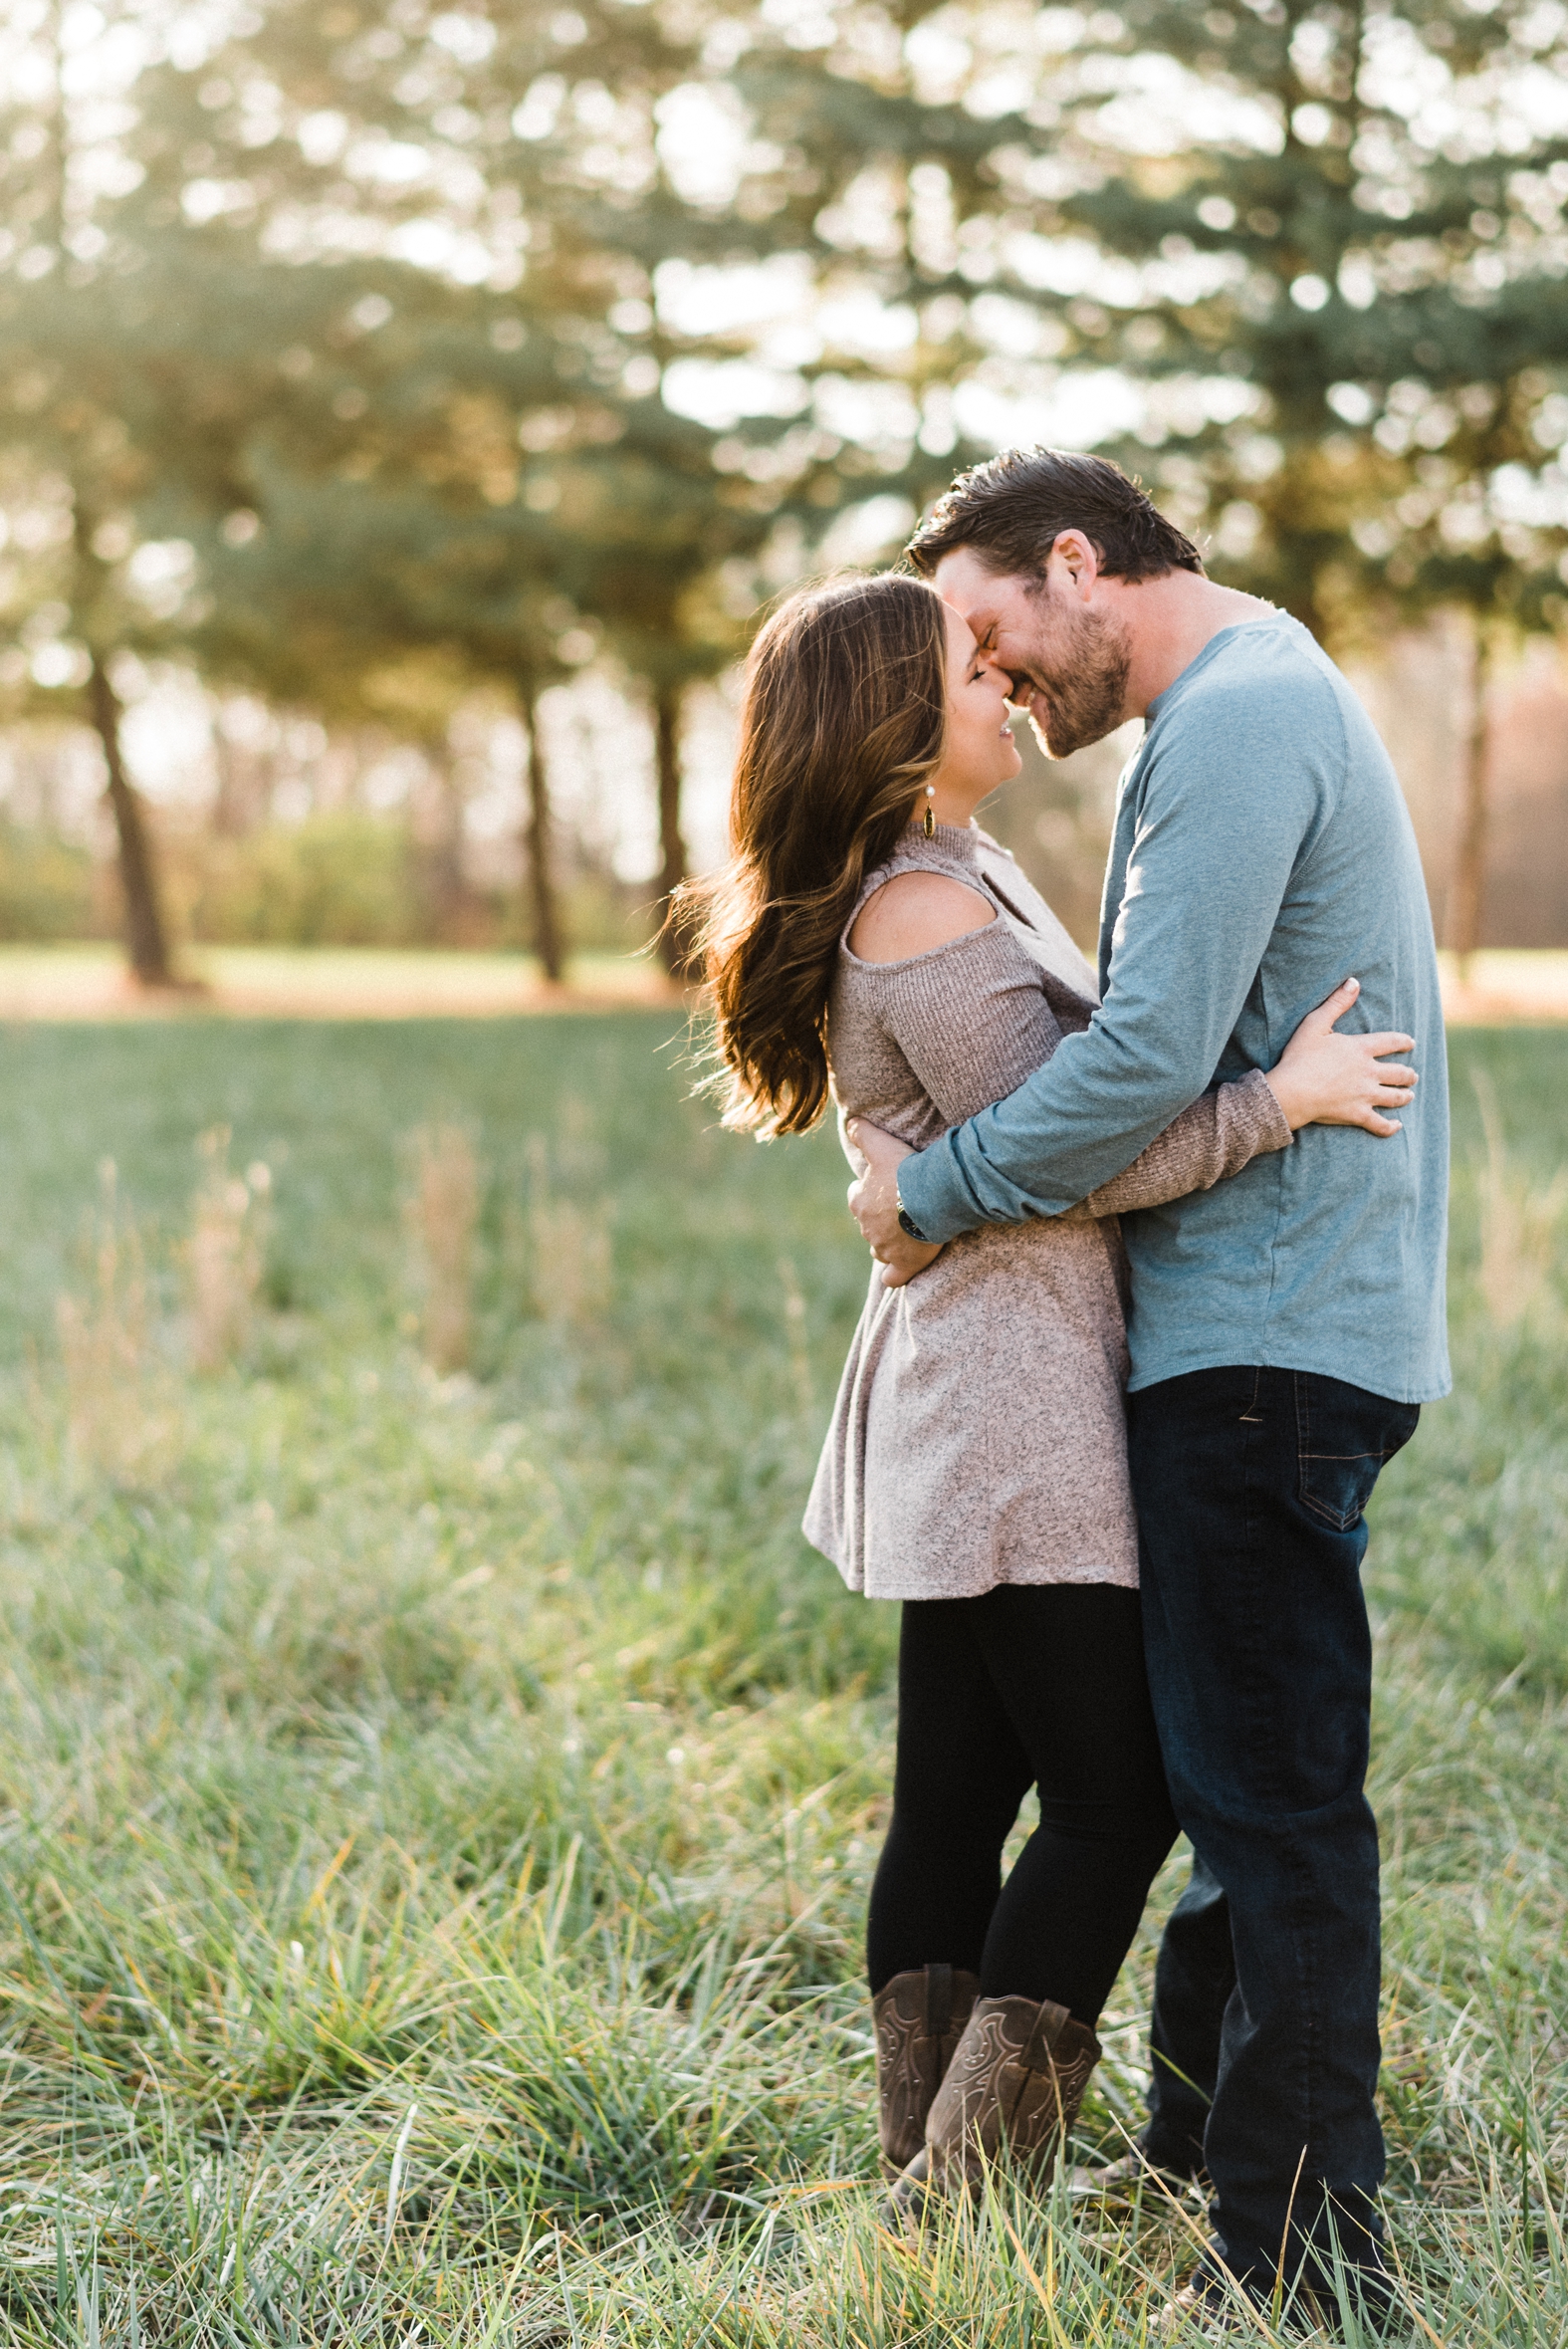 Downtown St. Louis,Engagement Photography,Real Engagement,St. Louis Arch Engagement,St. Louis Engagement,Stl engagement,WInter Engagement,city garden,manda renee,peabody,st-louis-wedding-photographer,